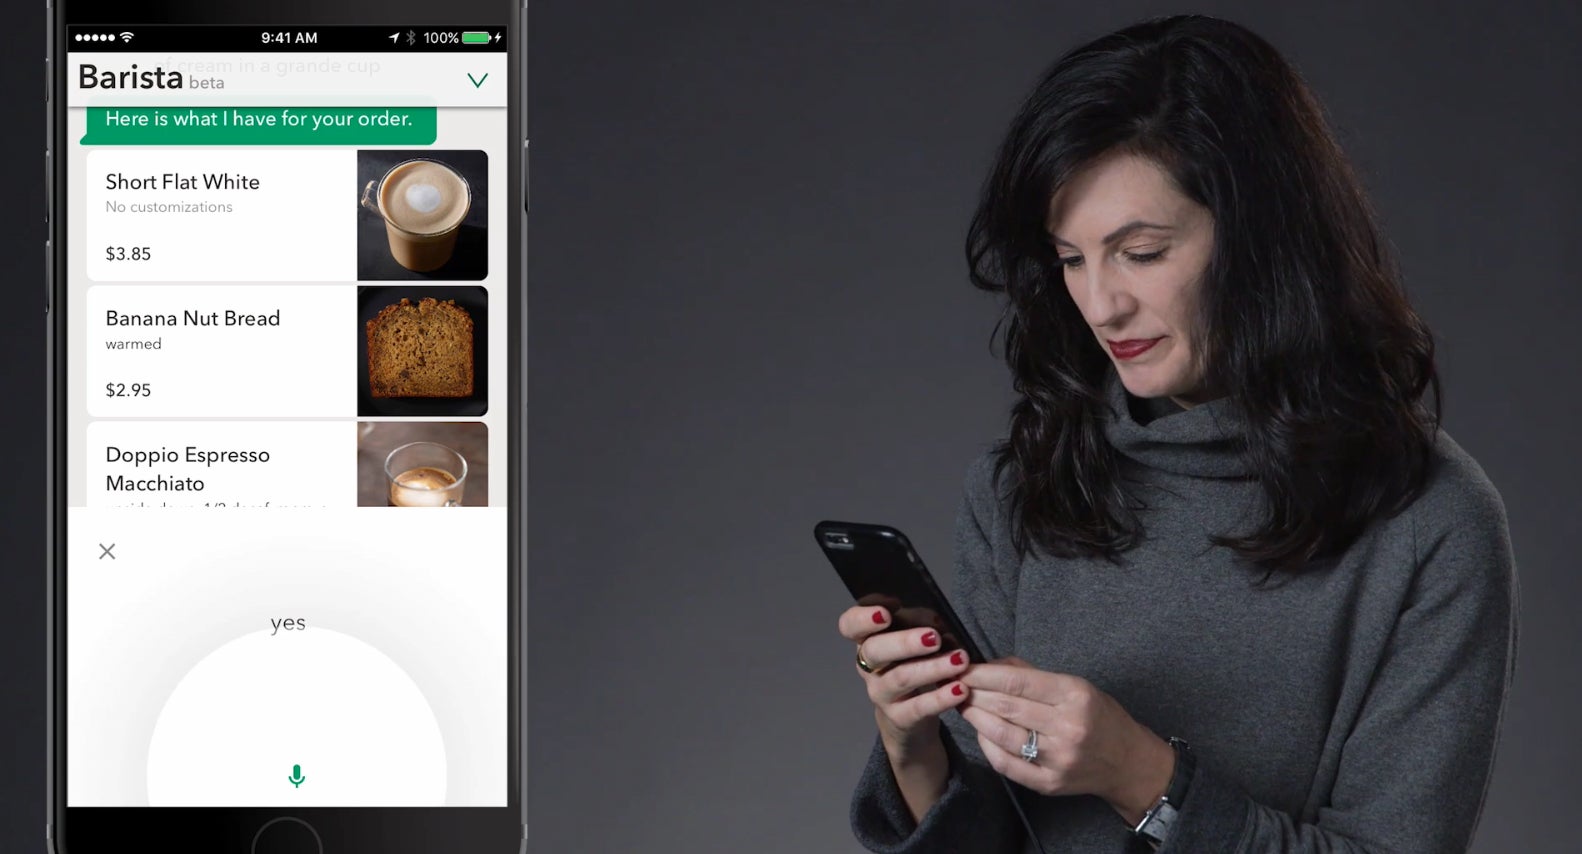 Starbucks announces voice ordering capabilities for its iOS and Android apps